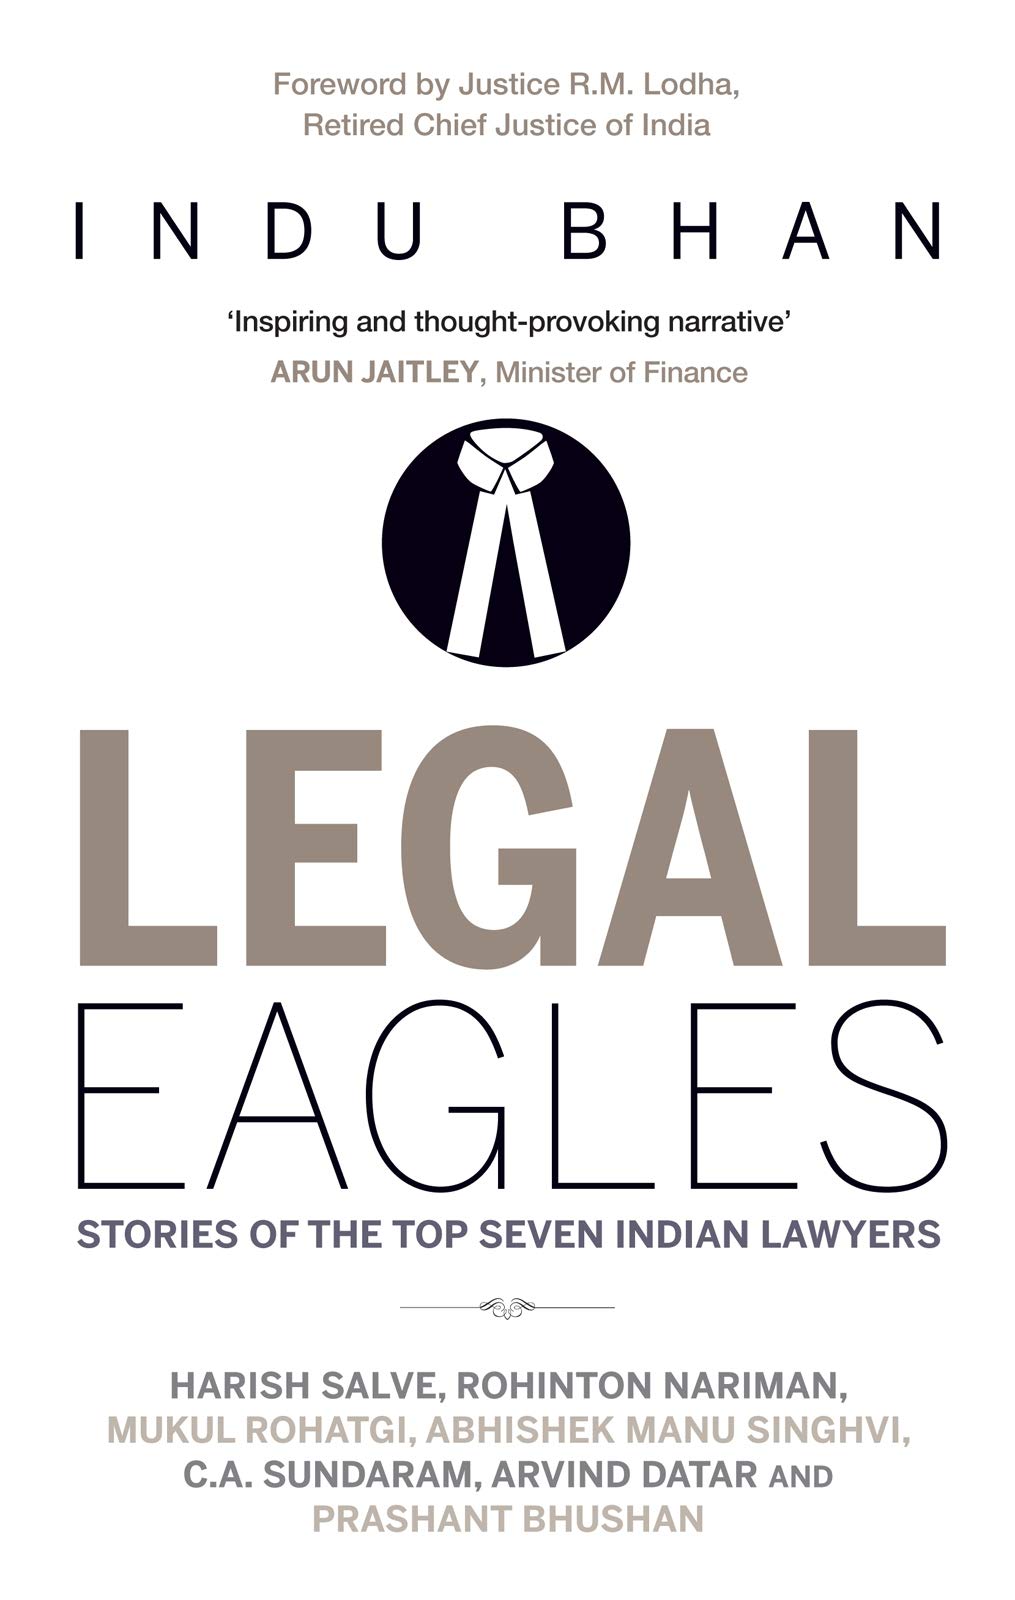 Legal Eagles: Stories of the Top Seven Indian Lawyers by Indu Bhan (Book Review)